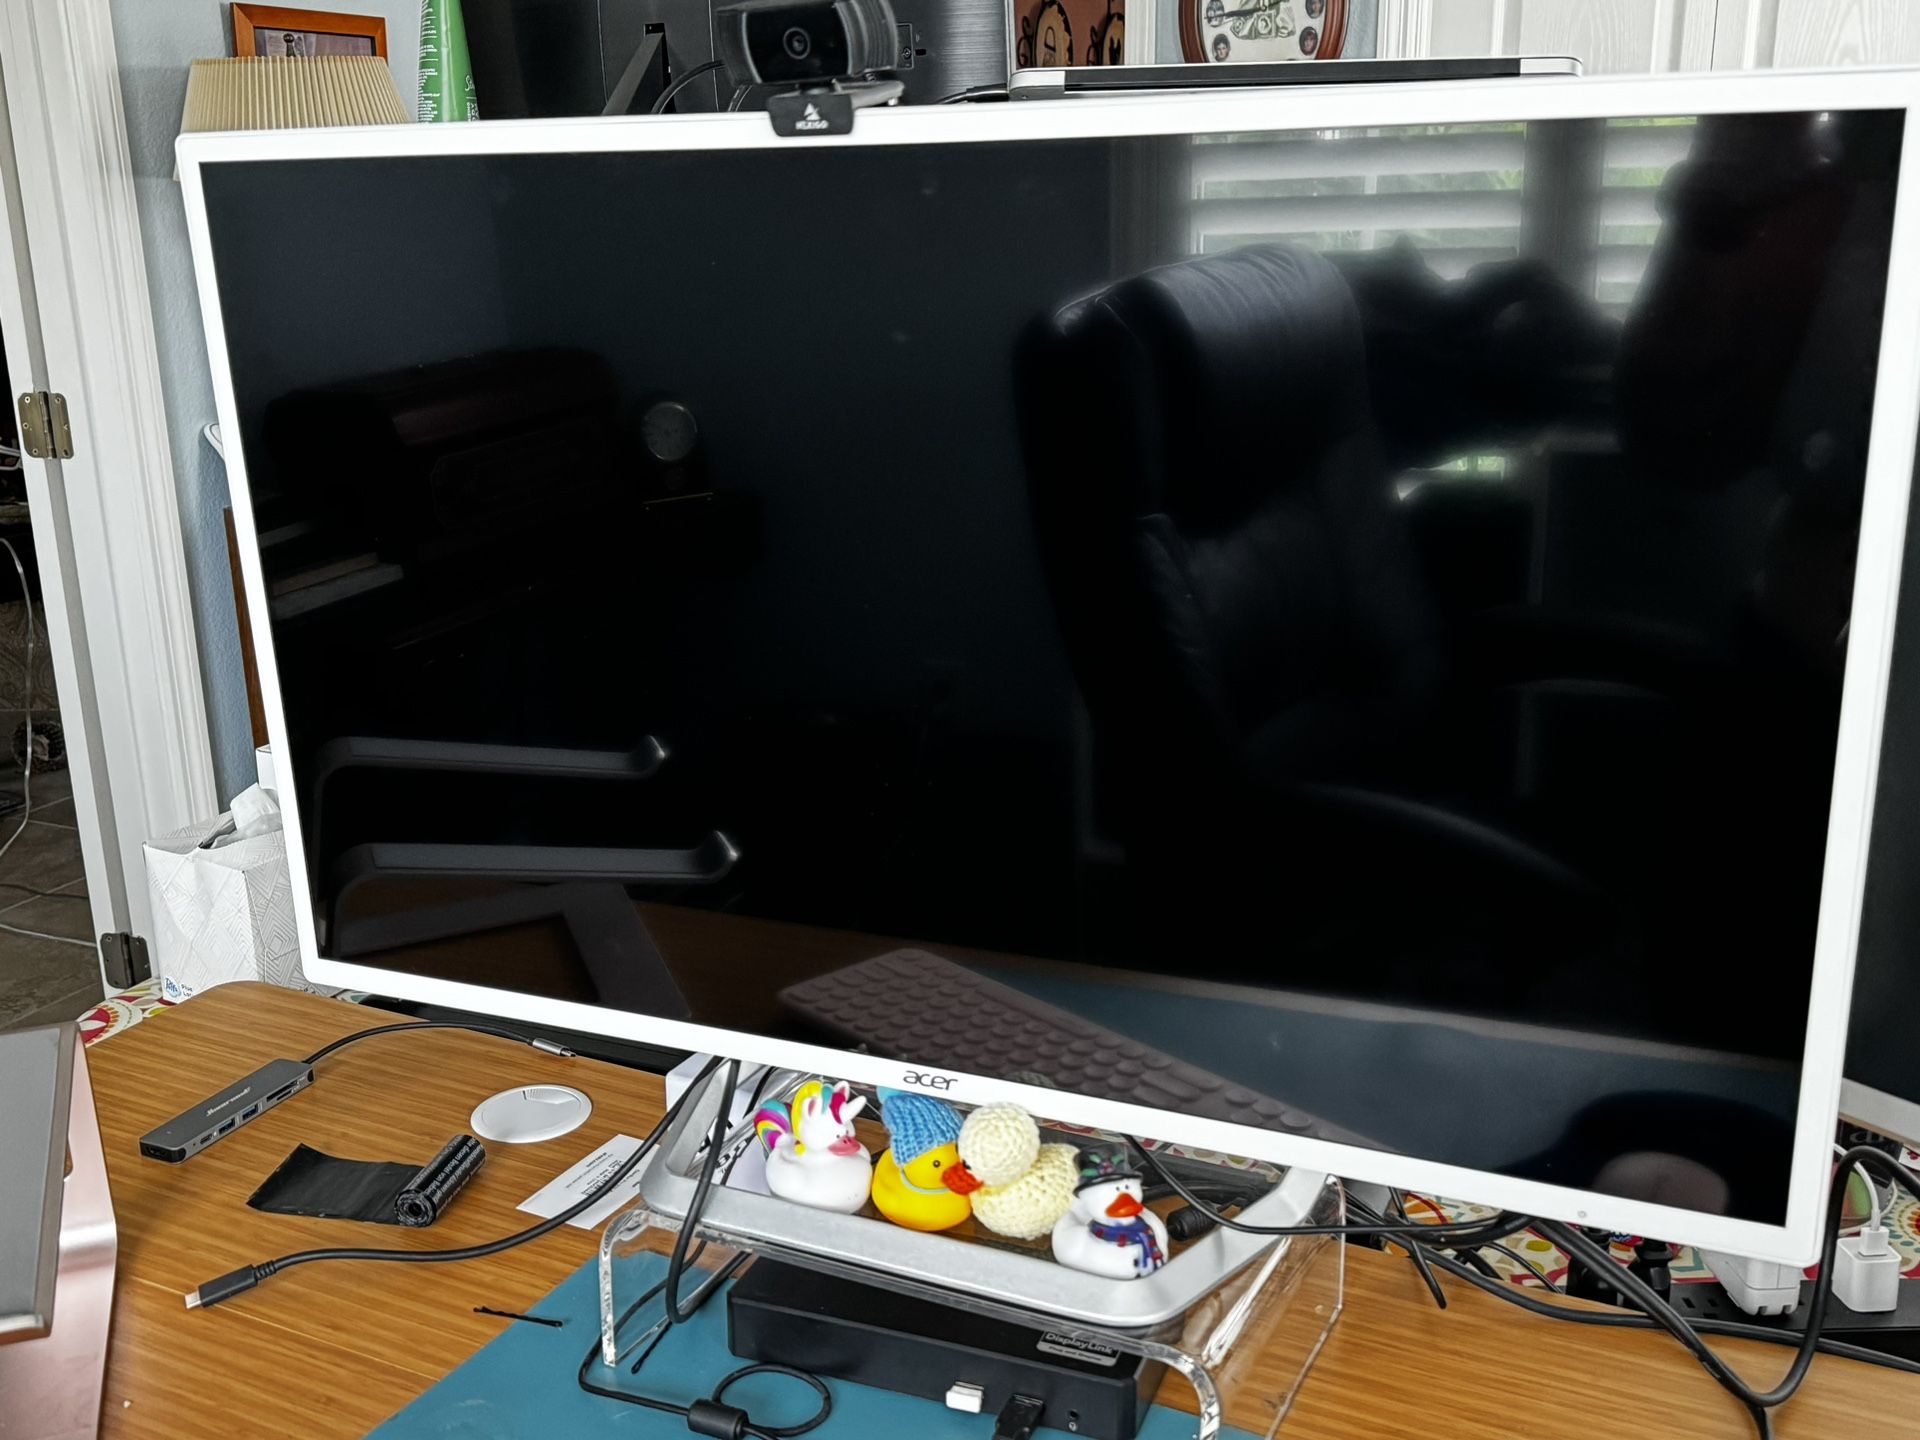 32” External Monitor With power cord